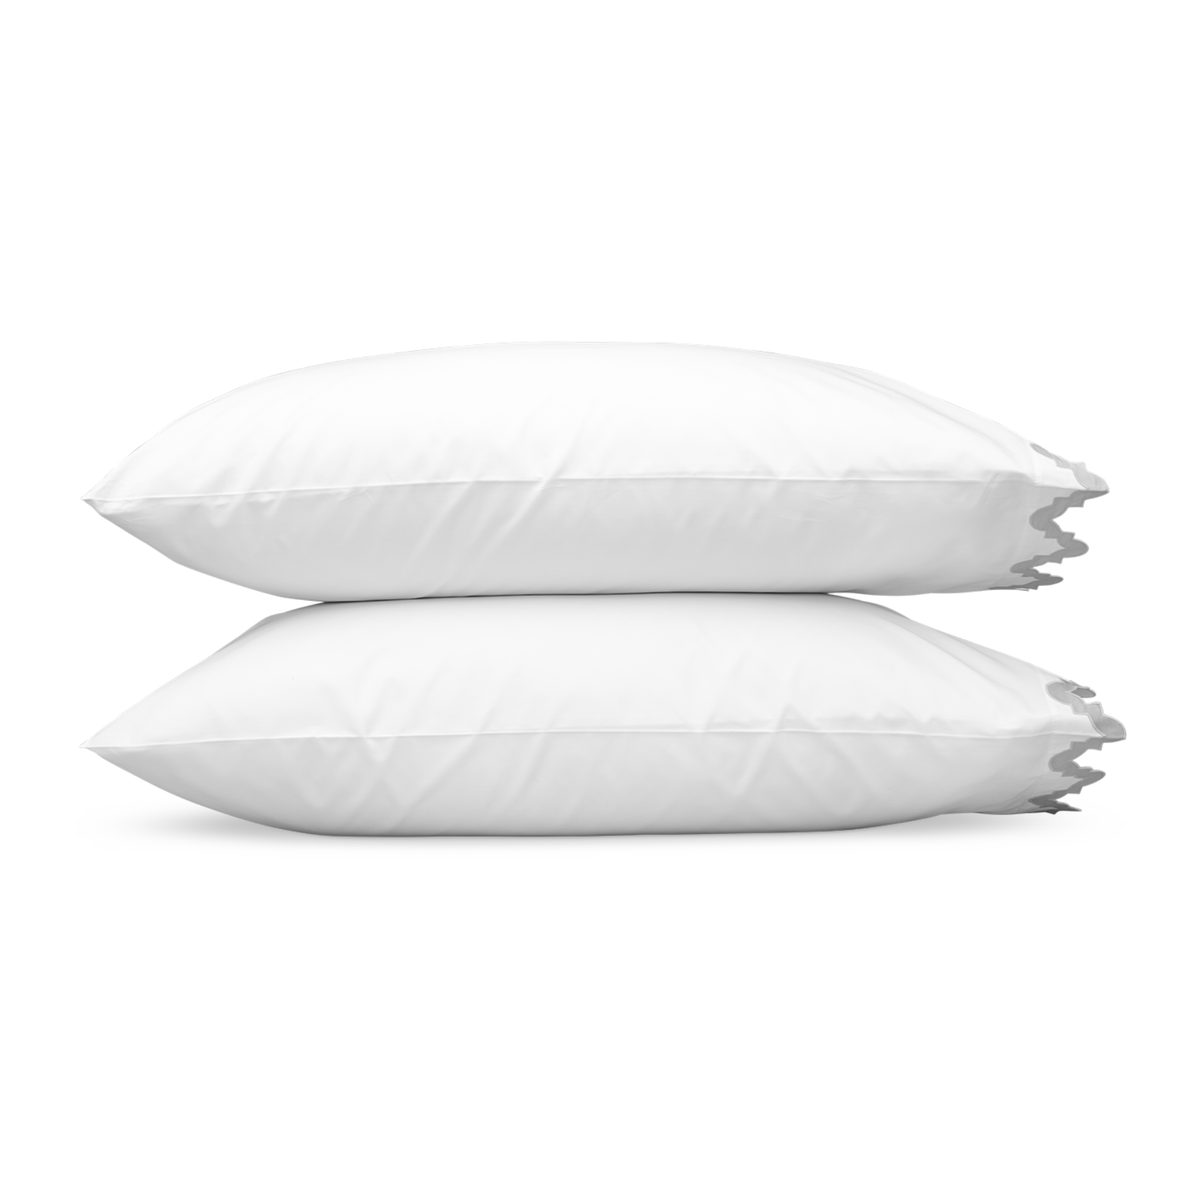 Pair of Pillowcases of Matouk Aziza Bedding in Silver Color